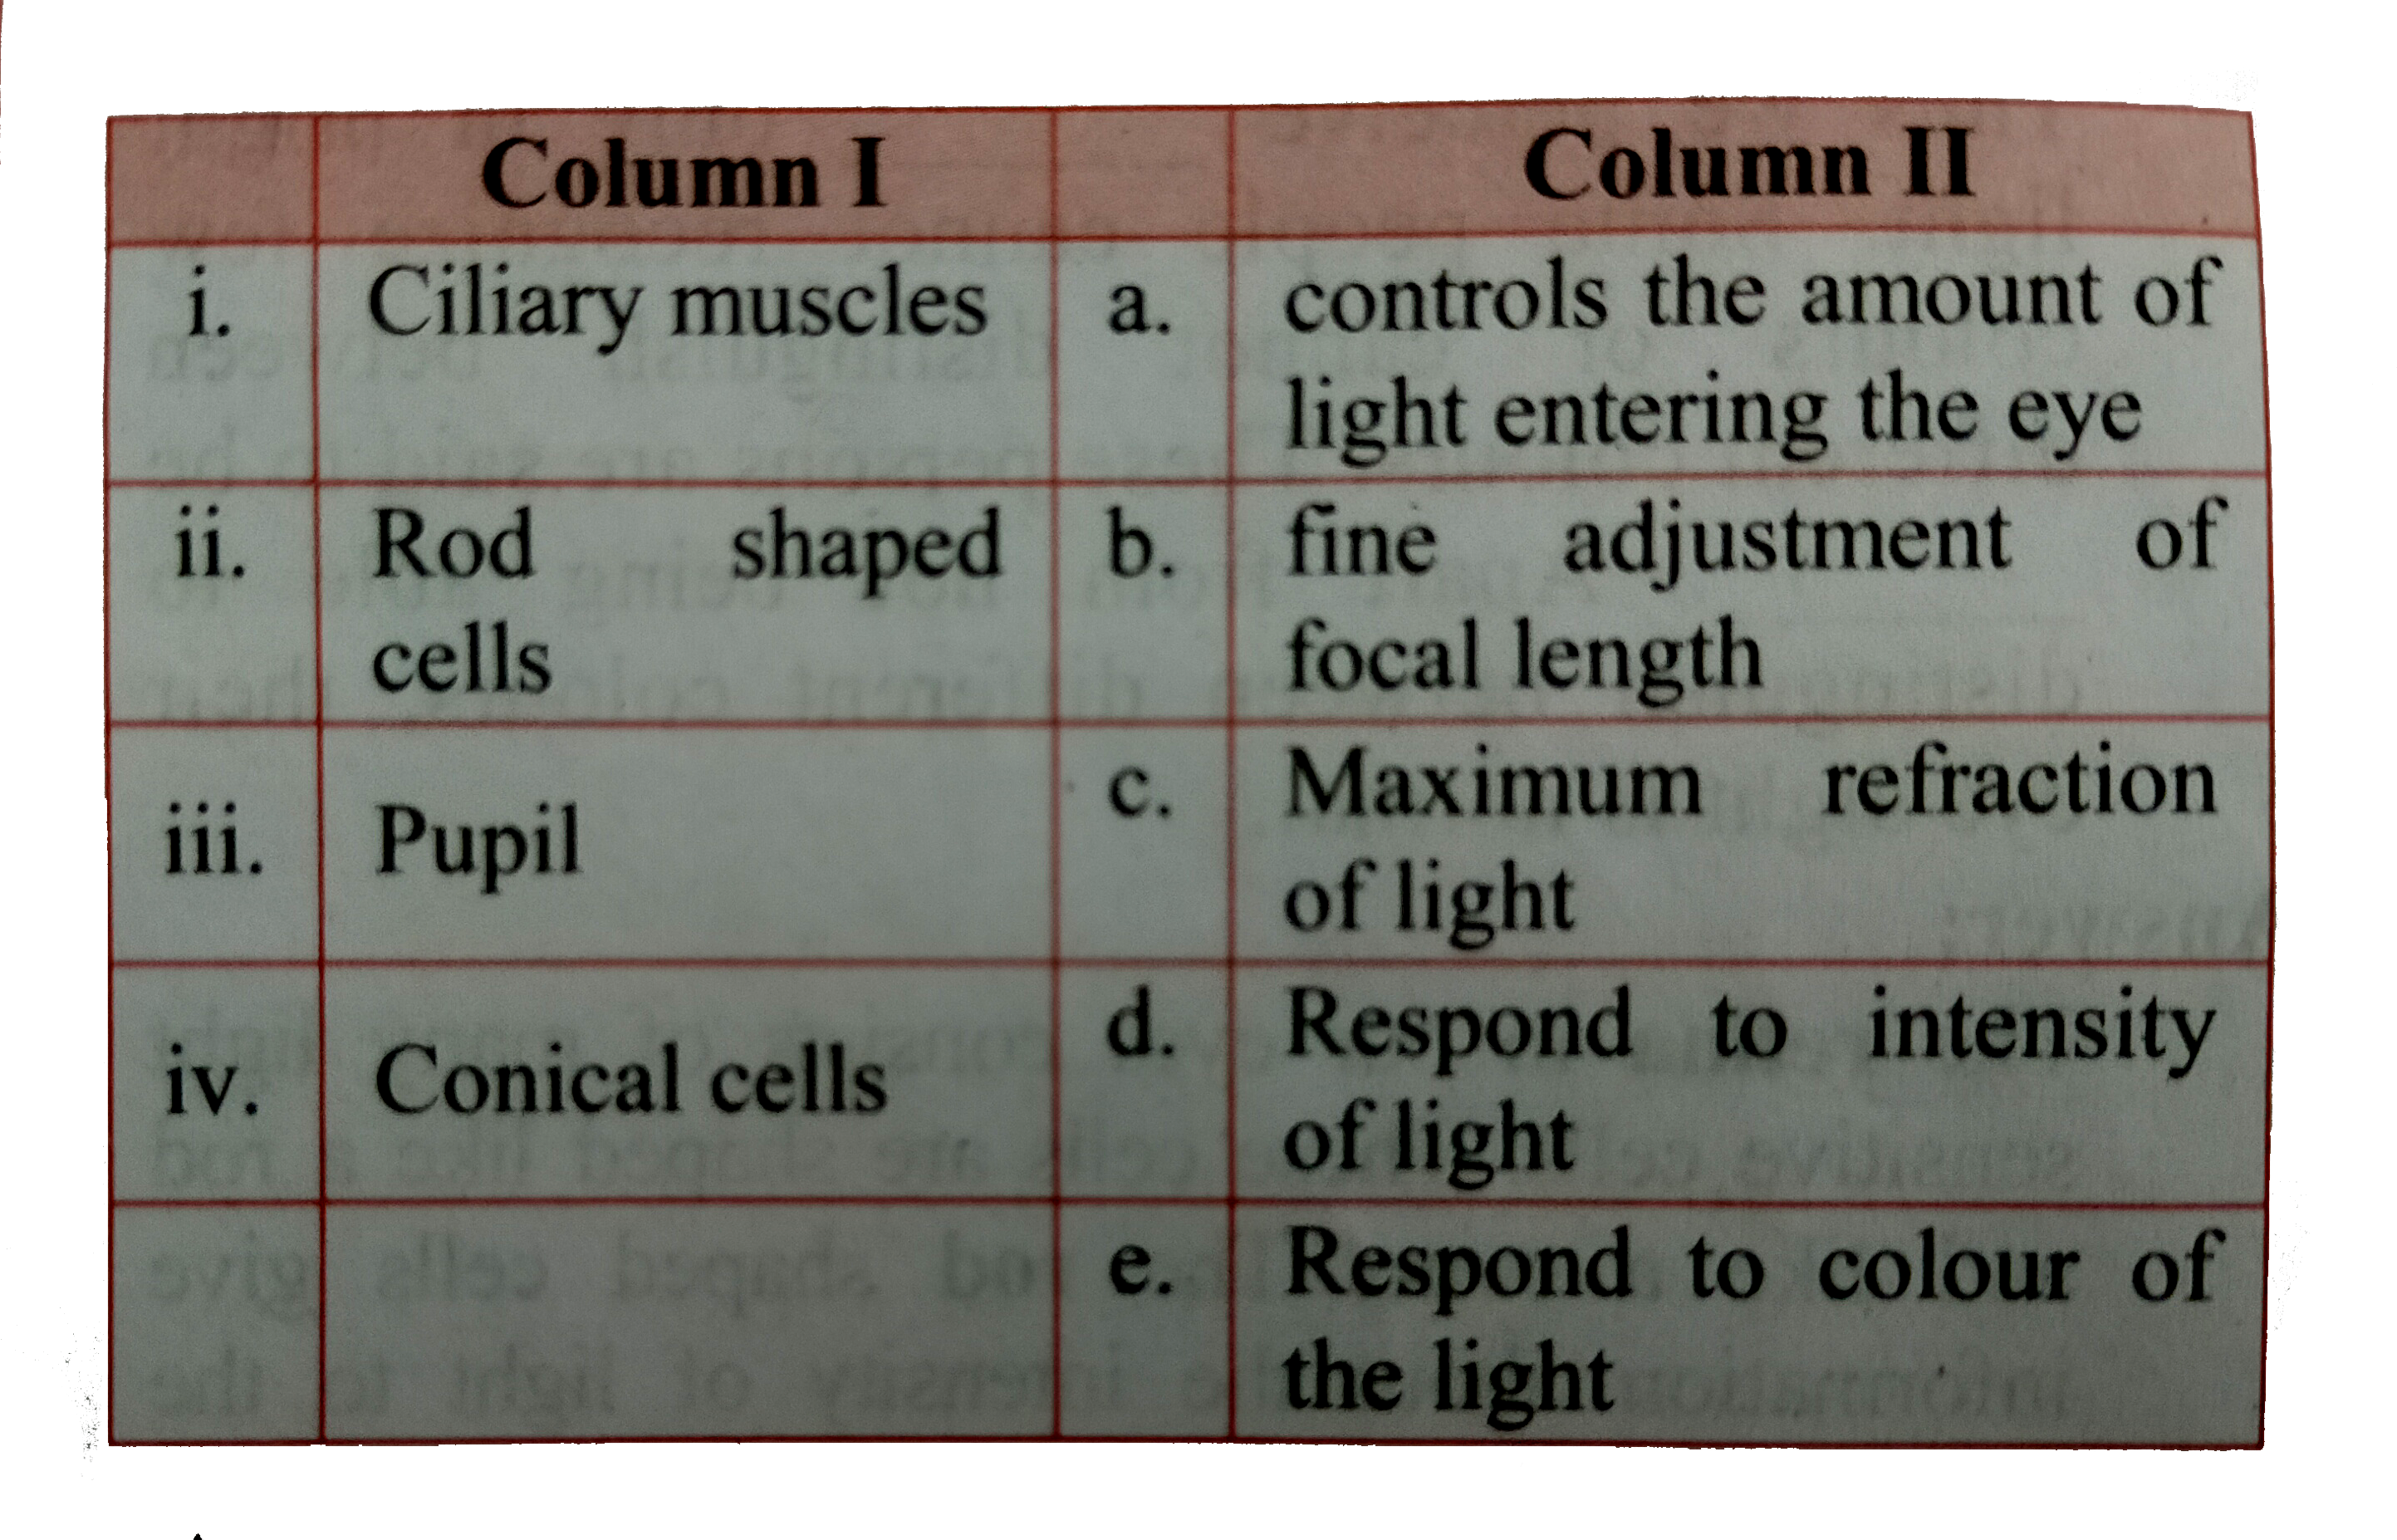 Match the parts of human eye given in column I with their functions given in column II.